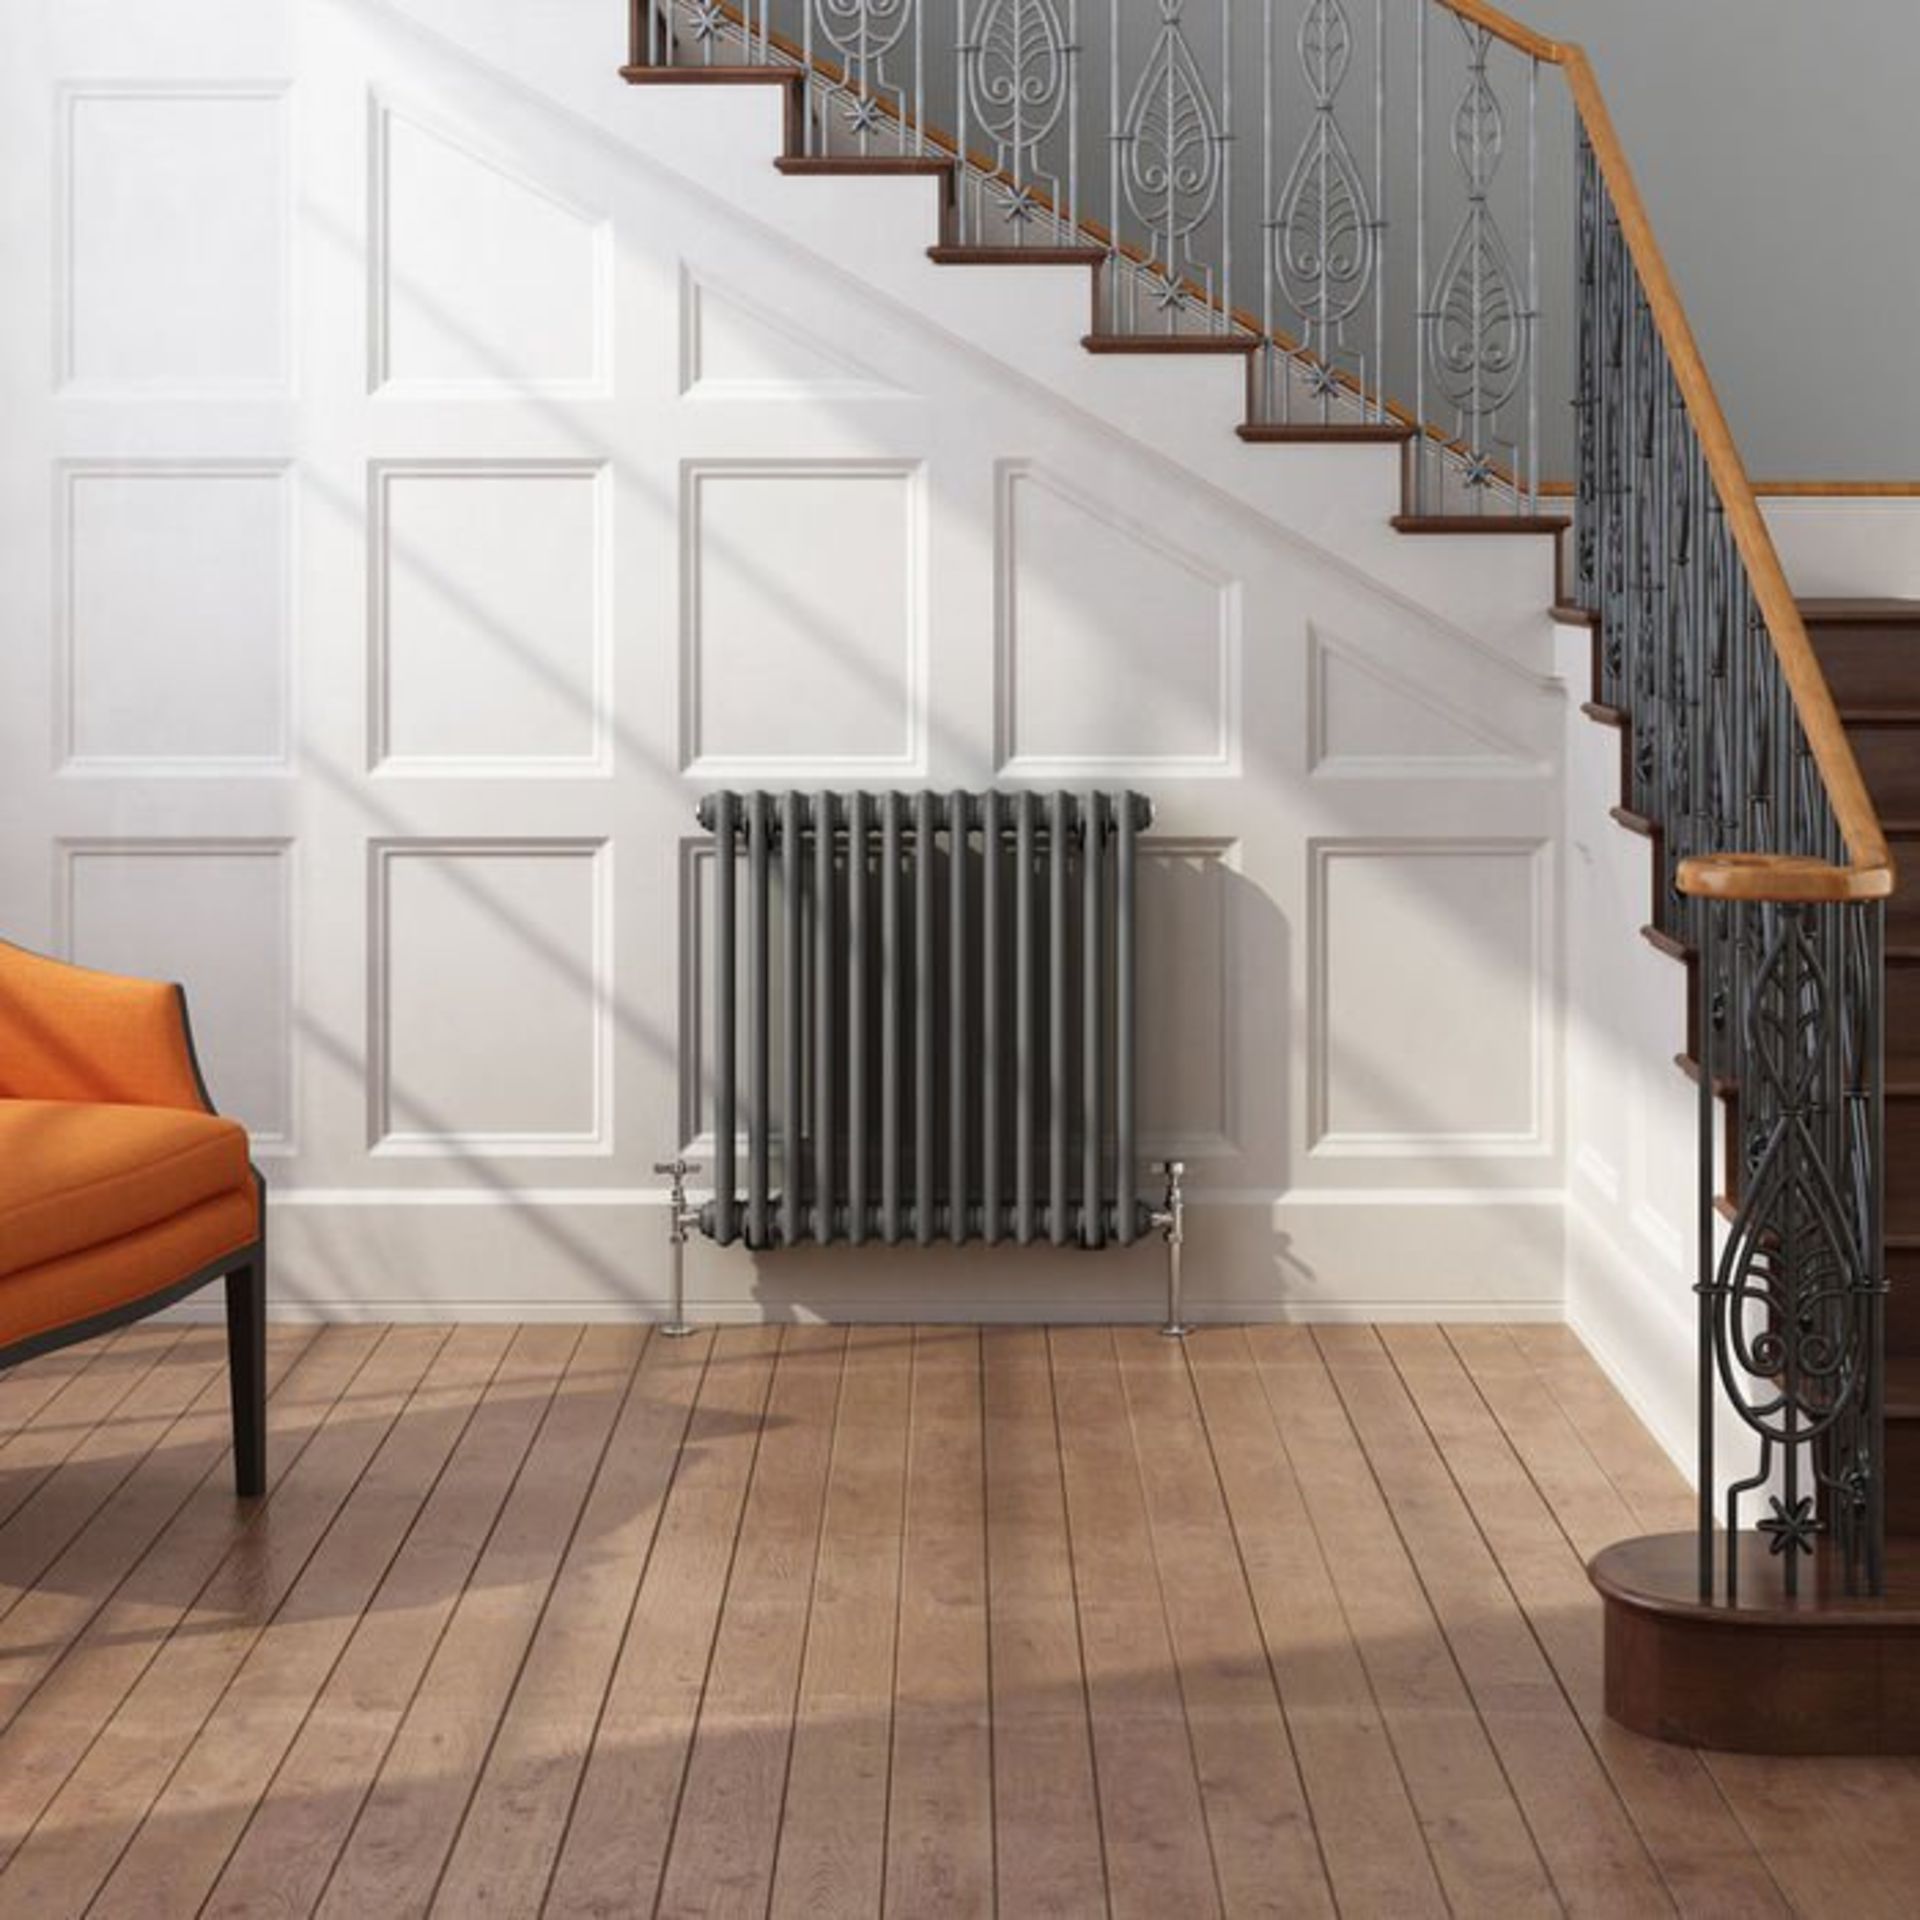 (L113) 600x603mm Anthracite Double Panel Horizontal Colosseum Traditional Radiator. RRP £337.99. - Image 3 of 3